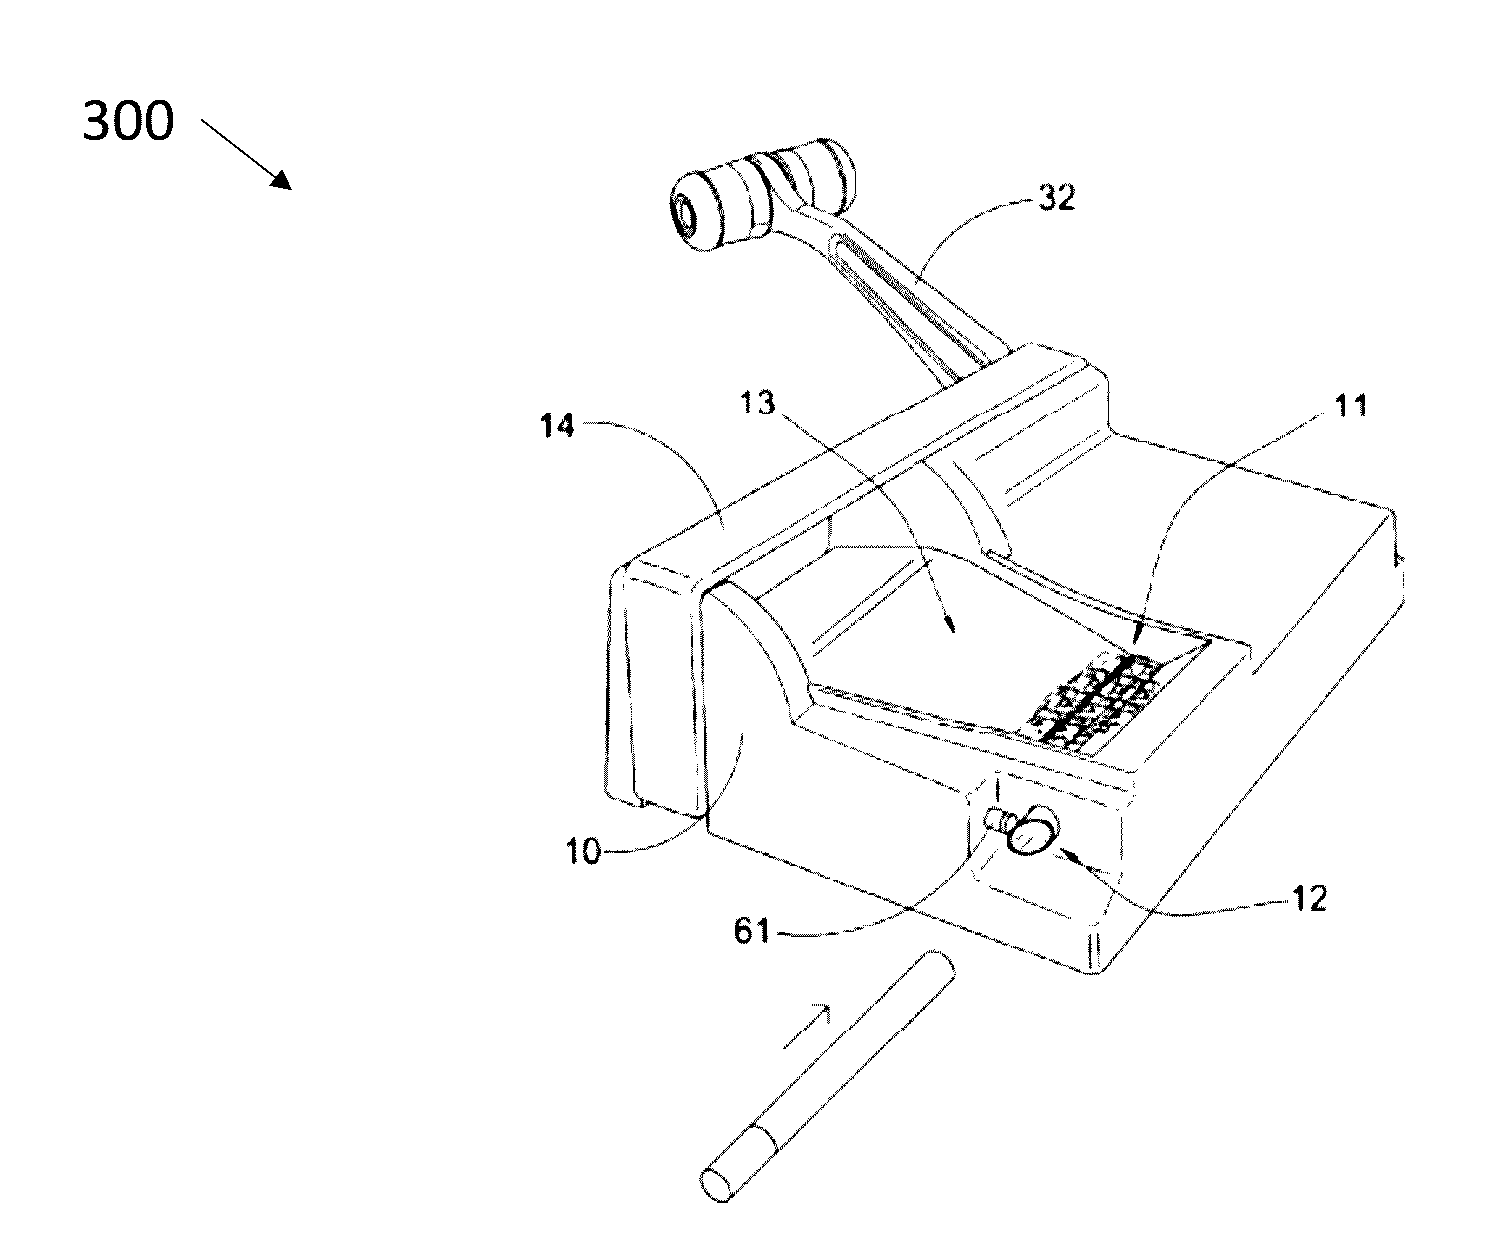 Apparatus, systems and methods for rotational drive modules for use with cigarette tobacco filling devices